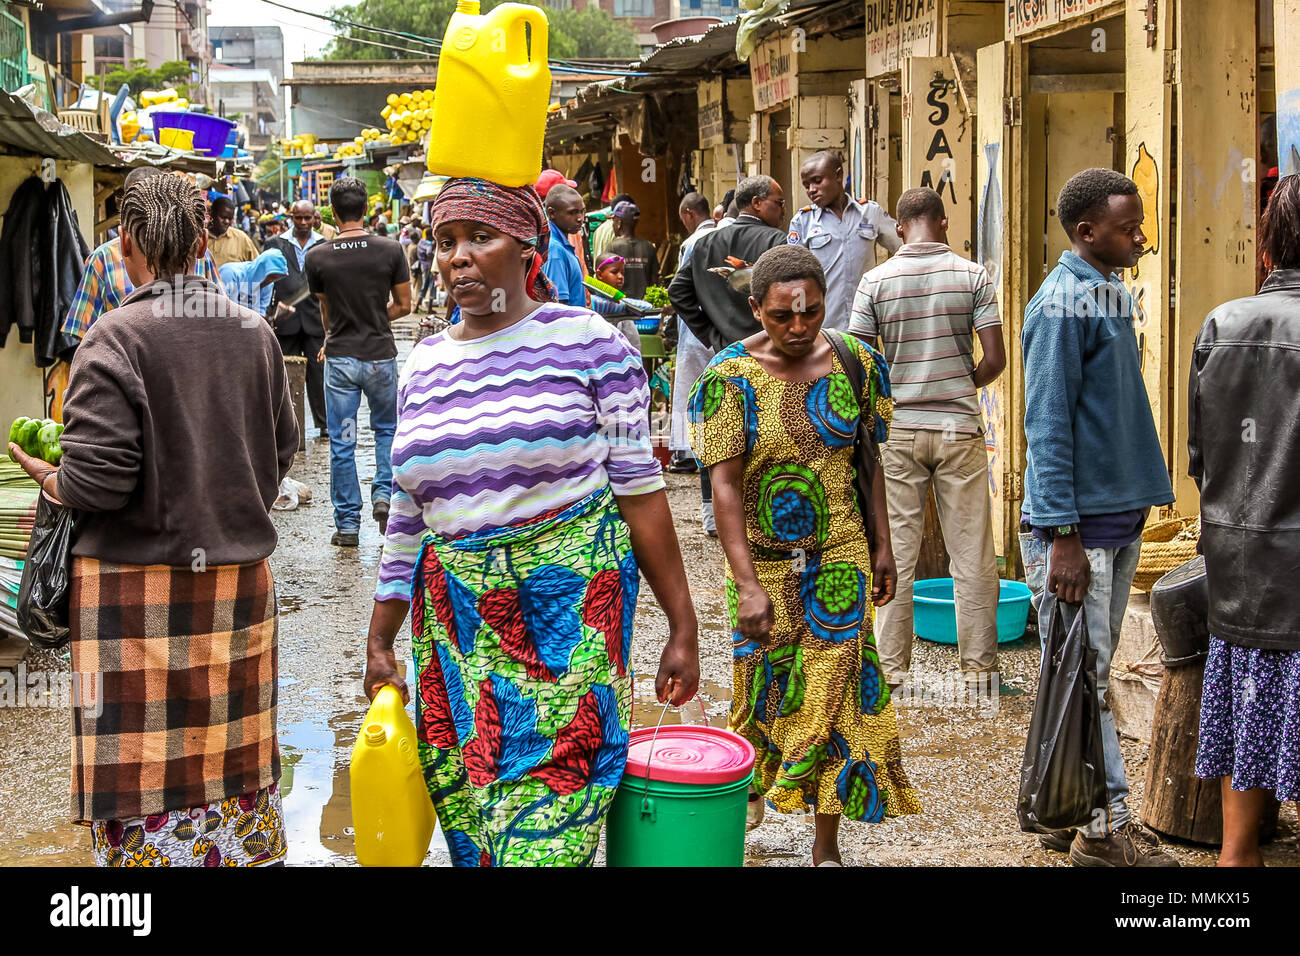 Arusha, Tanzania - January 2, 2013: A woman walks on her head carrying a yellow tank  in a market of the town Stock Photo